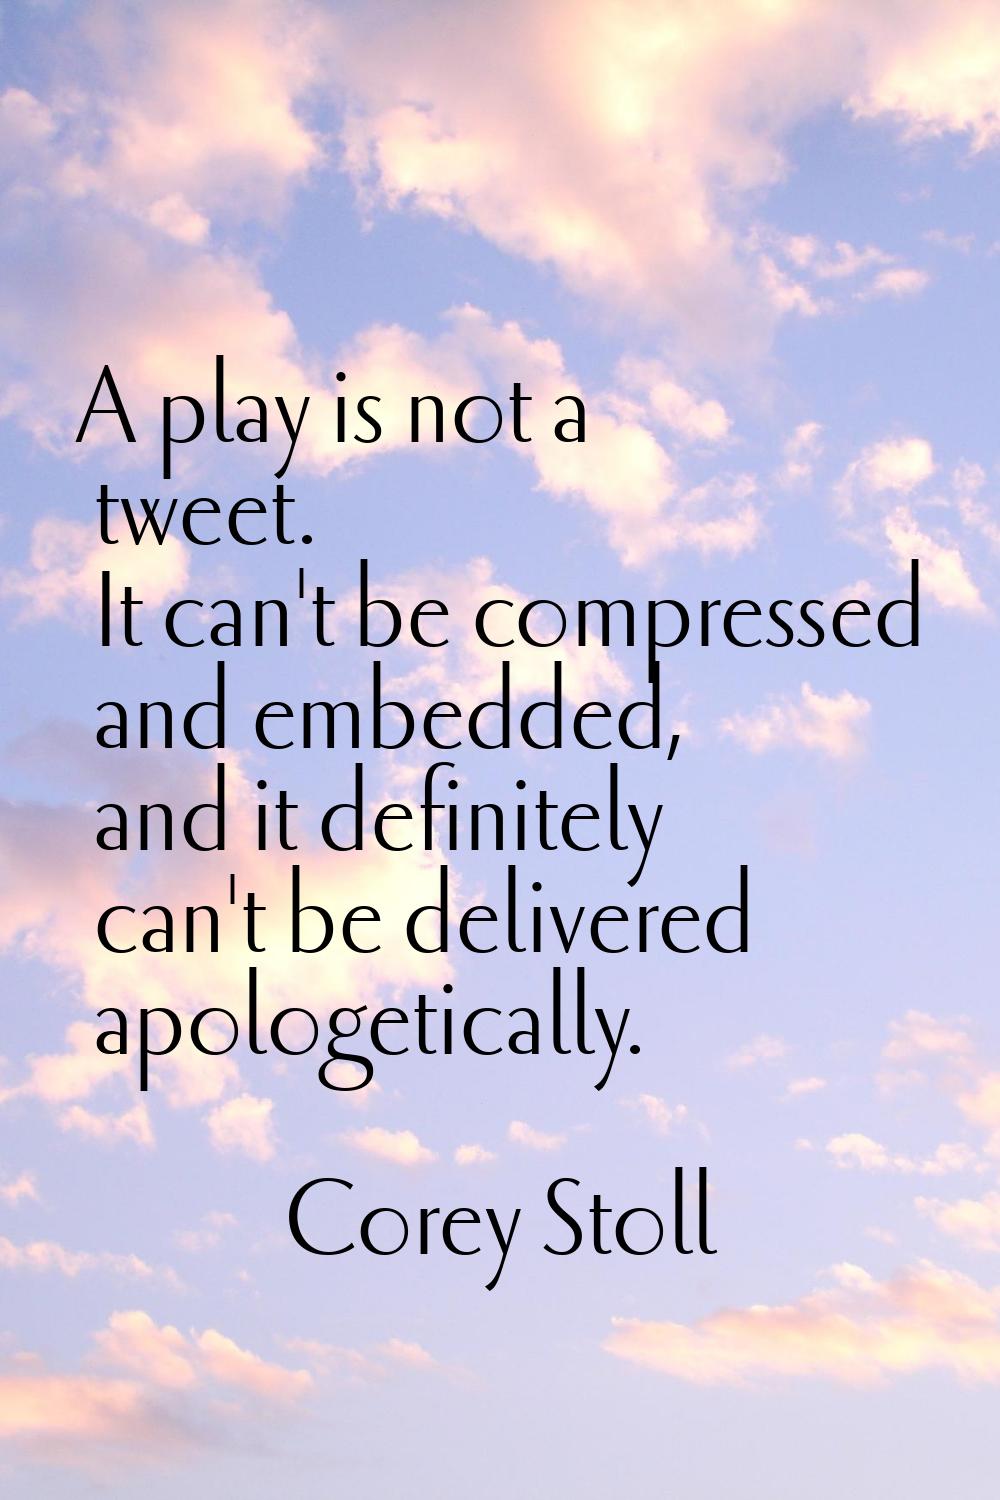 A play is not a tweet. It can't be compressed and embedded, and it definitely can't be delivered ap